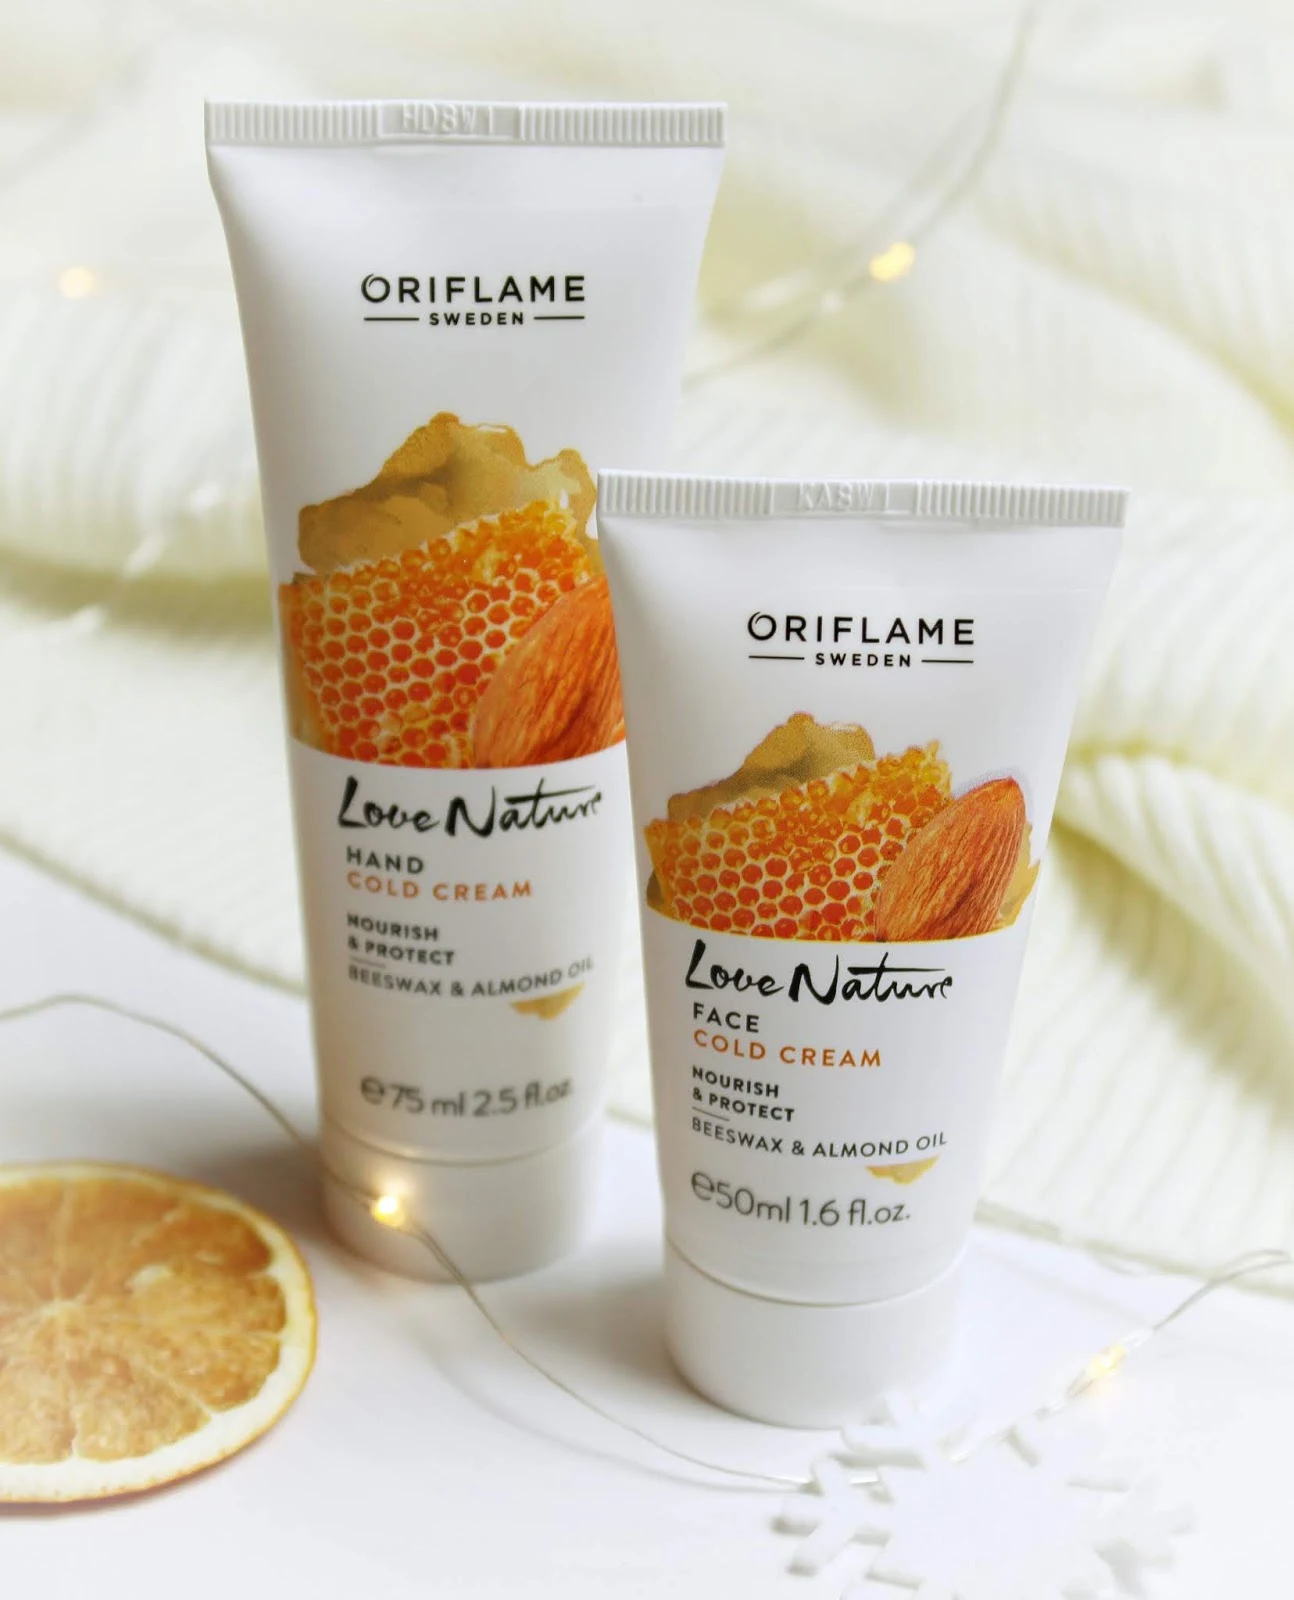 NOWOŚĆ - Love Nature Hand Cold Cream & Face Cold Cream - ORIFLAME